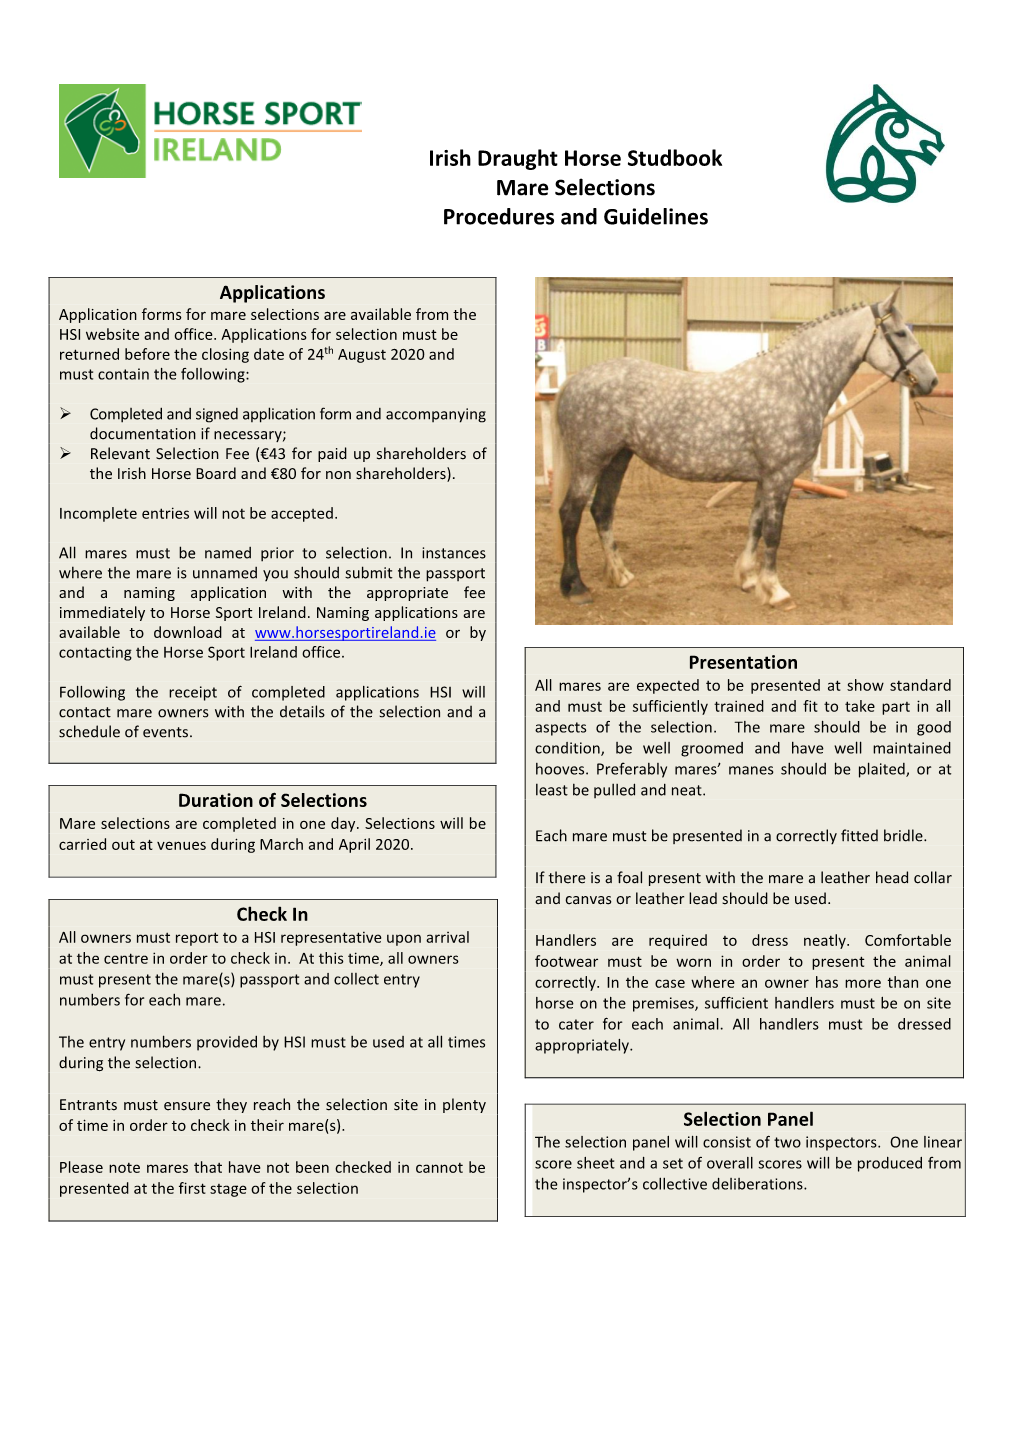 Irish Draught Horse Studbook Mare Selections Procedures And